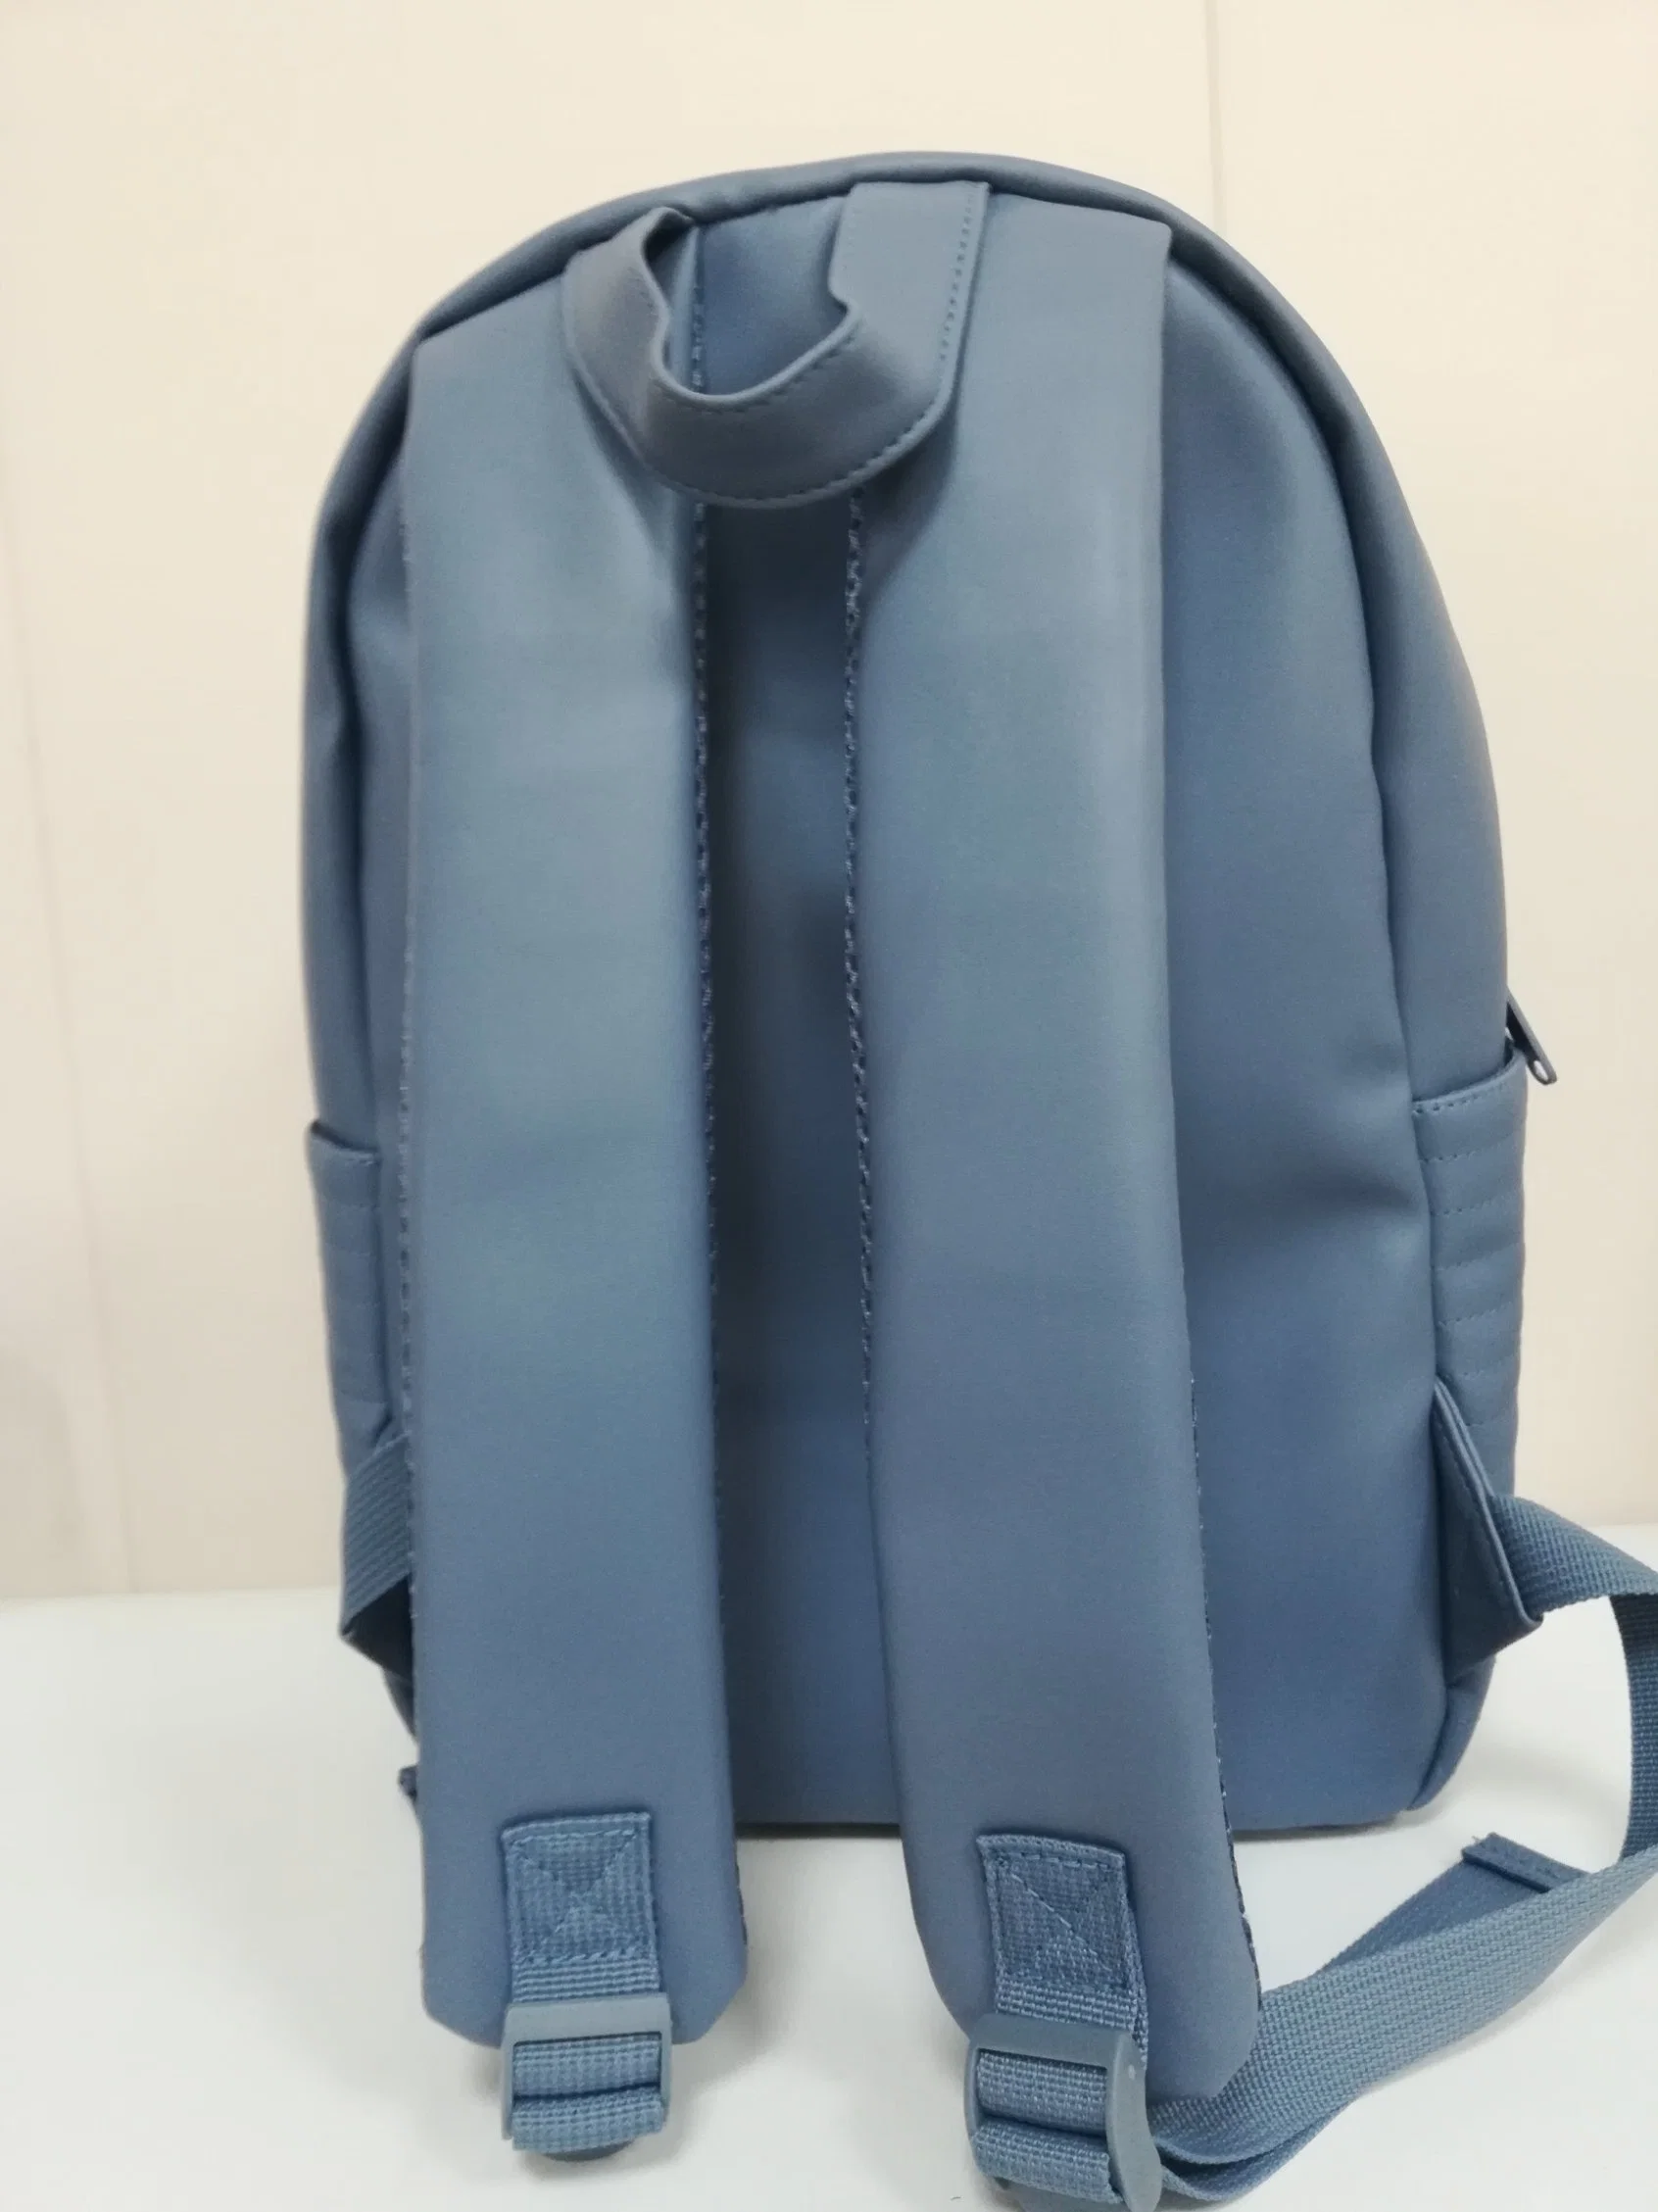 China Ss Factory New Style Fashion PU Leather Travel School Bag Backpacks